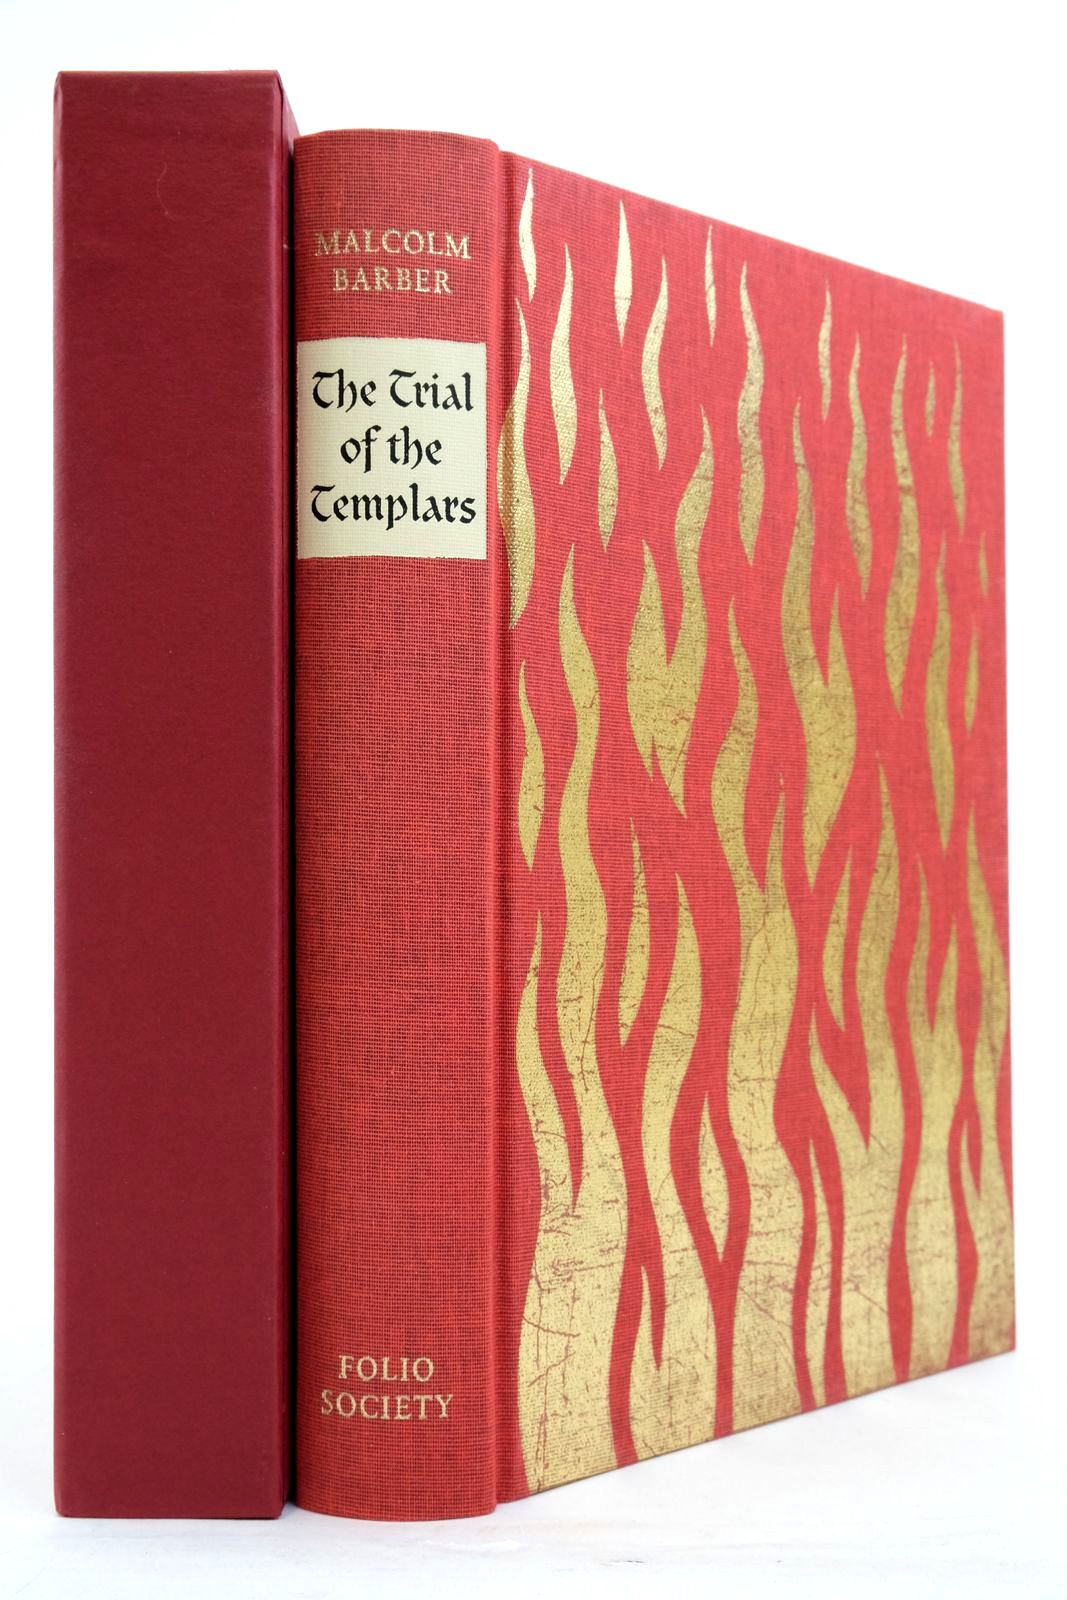 Photo of THE TRIAL OF THE TEMPLARS written by Barber, Malcolm published by Folio Society (STOCK CODE: 2137862)  for sale by Stella & Rose's Books